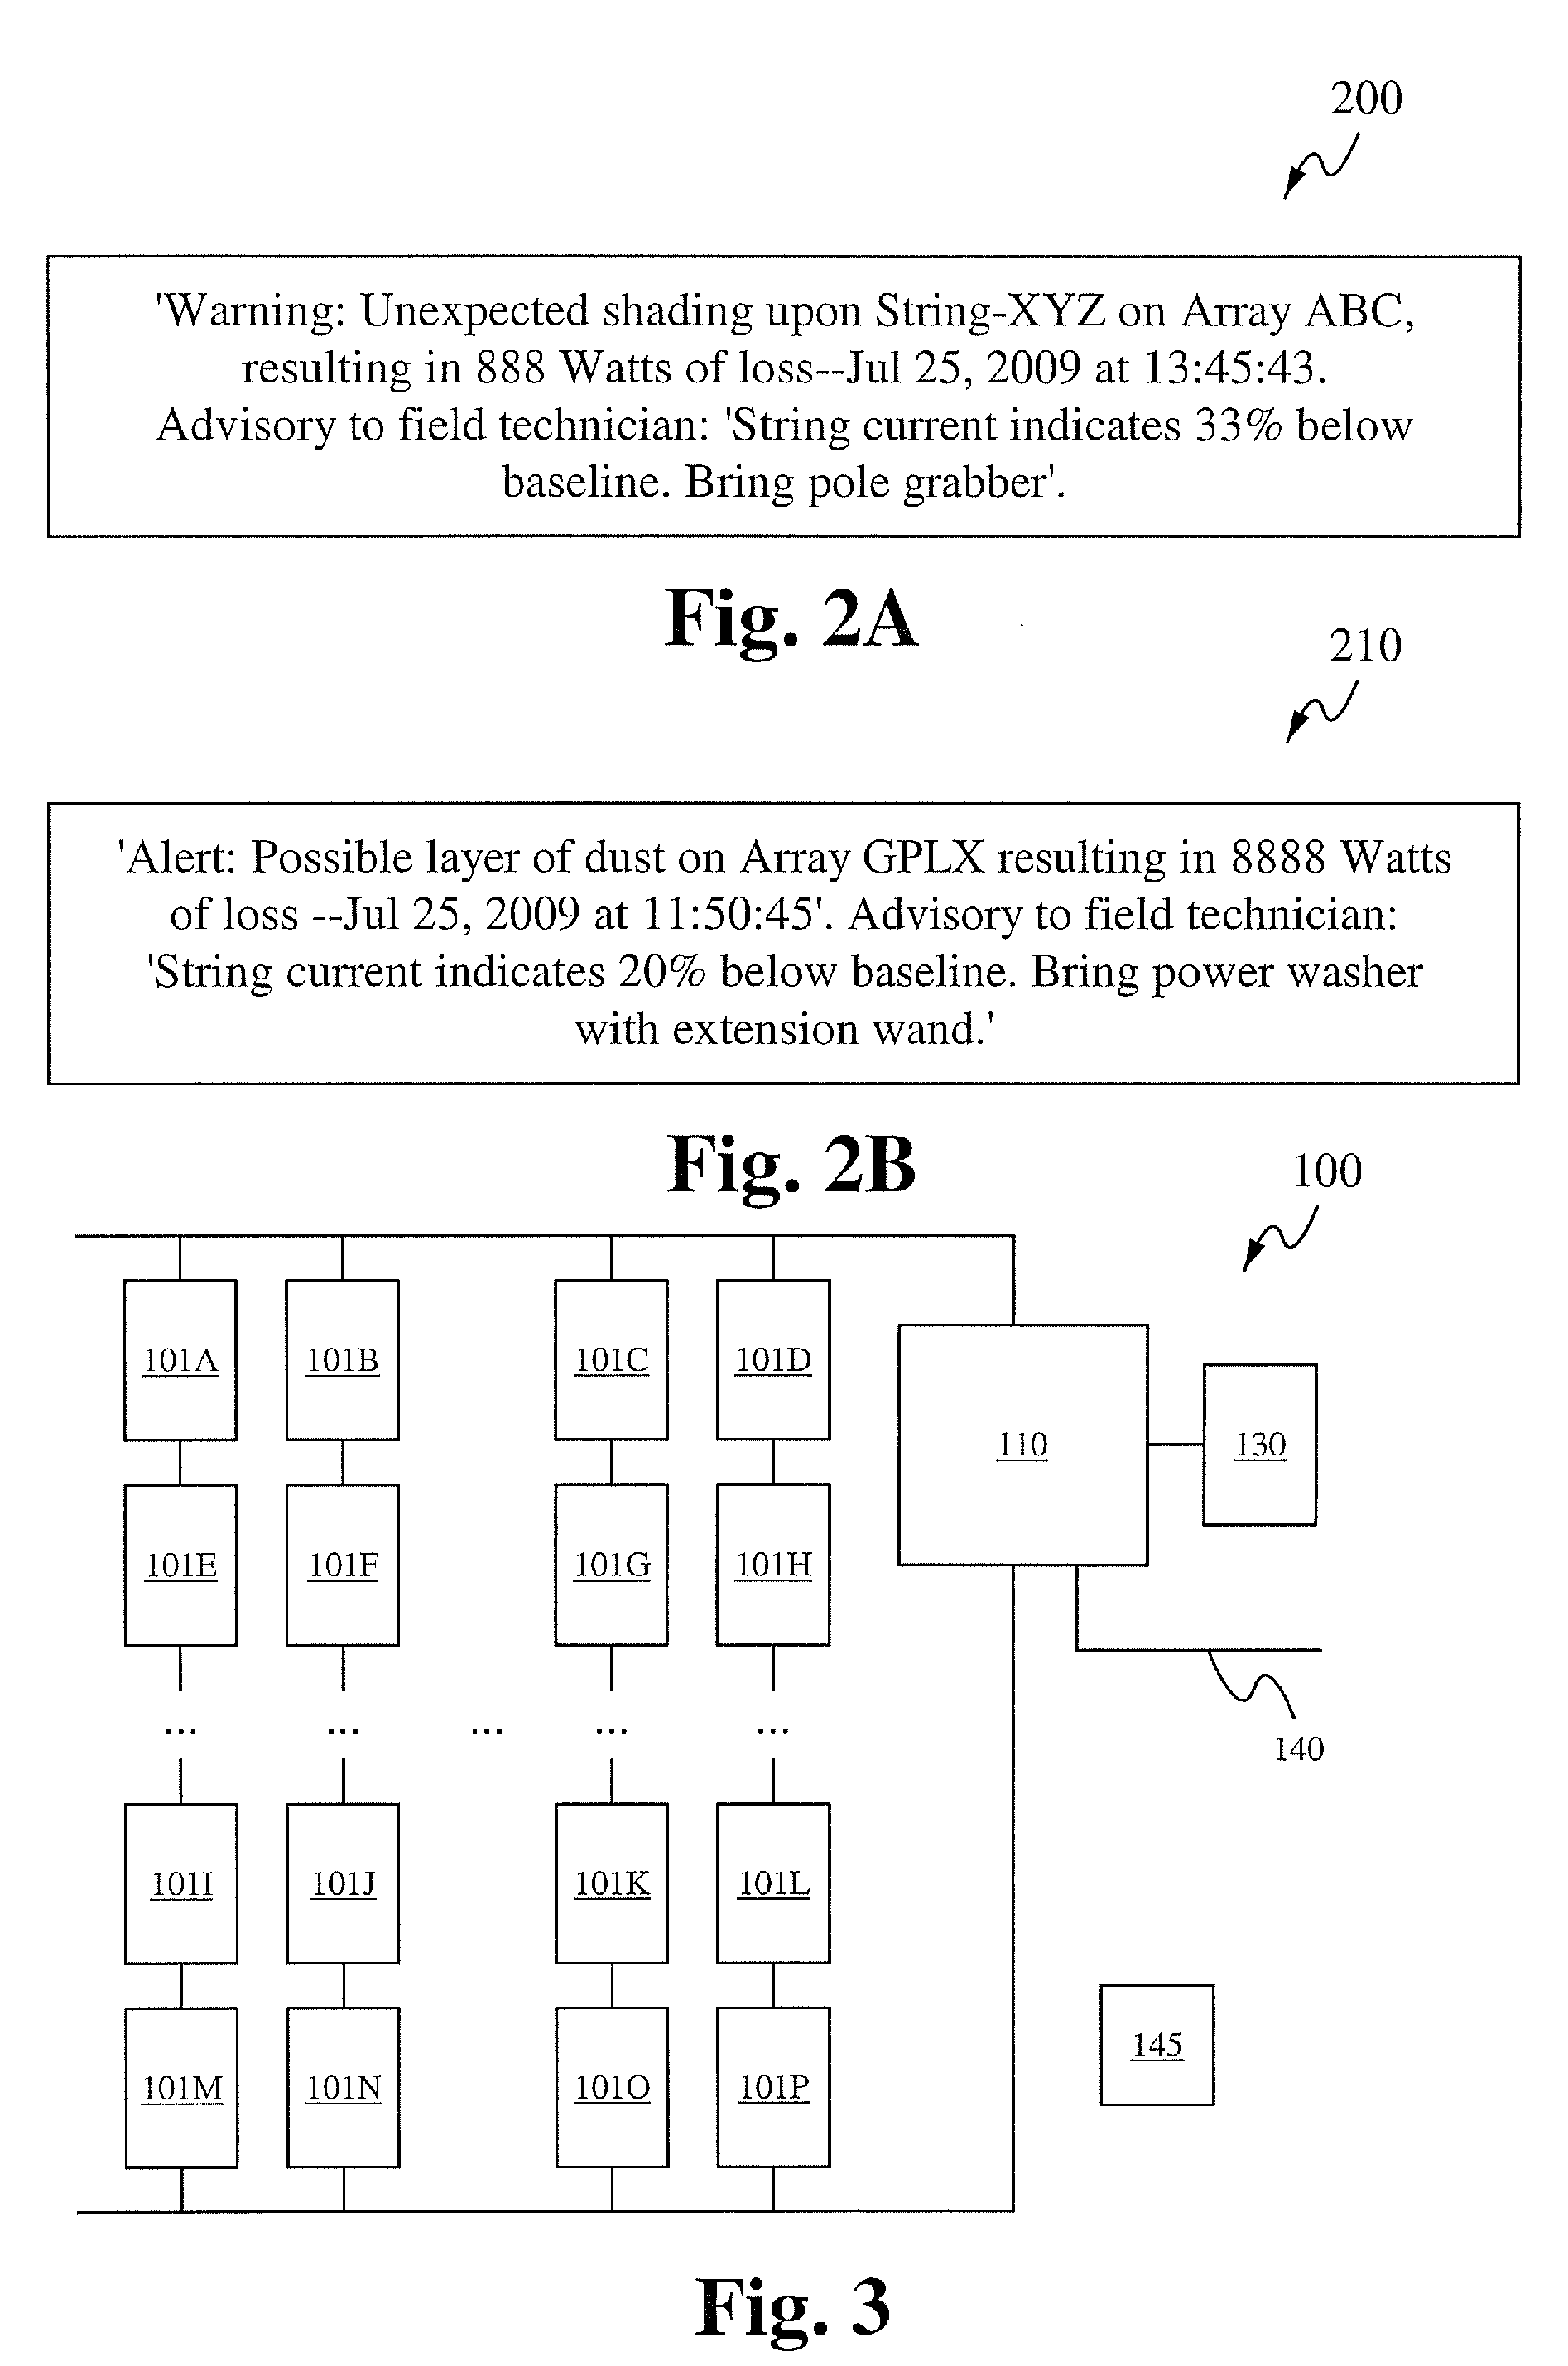 System for and method of monitoring and diagnosing the performance of photovoltaic or other renewable power plants